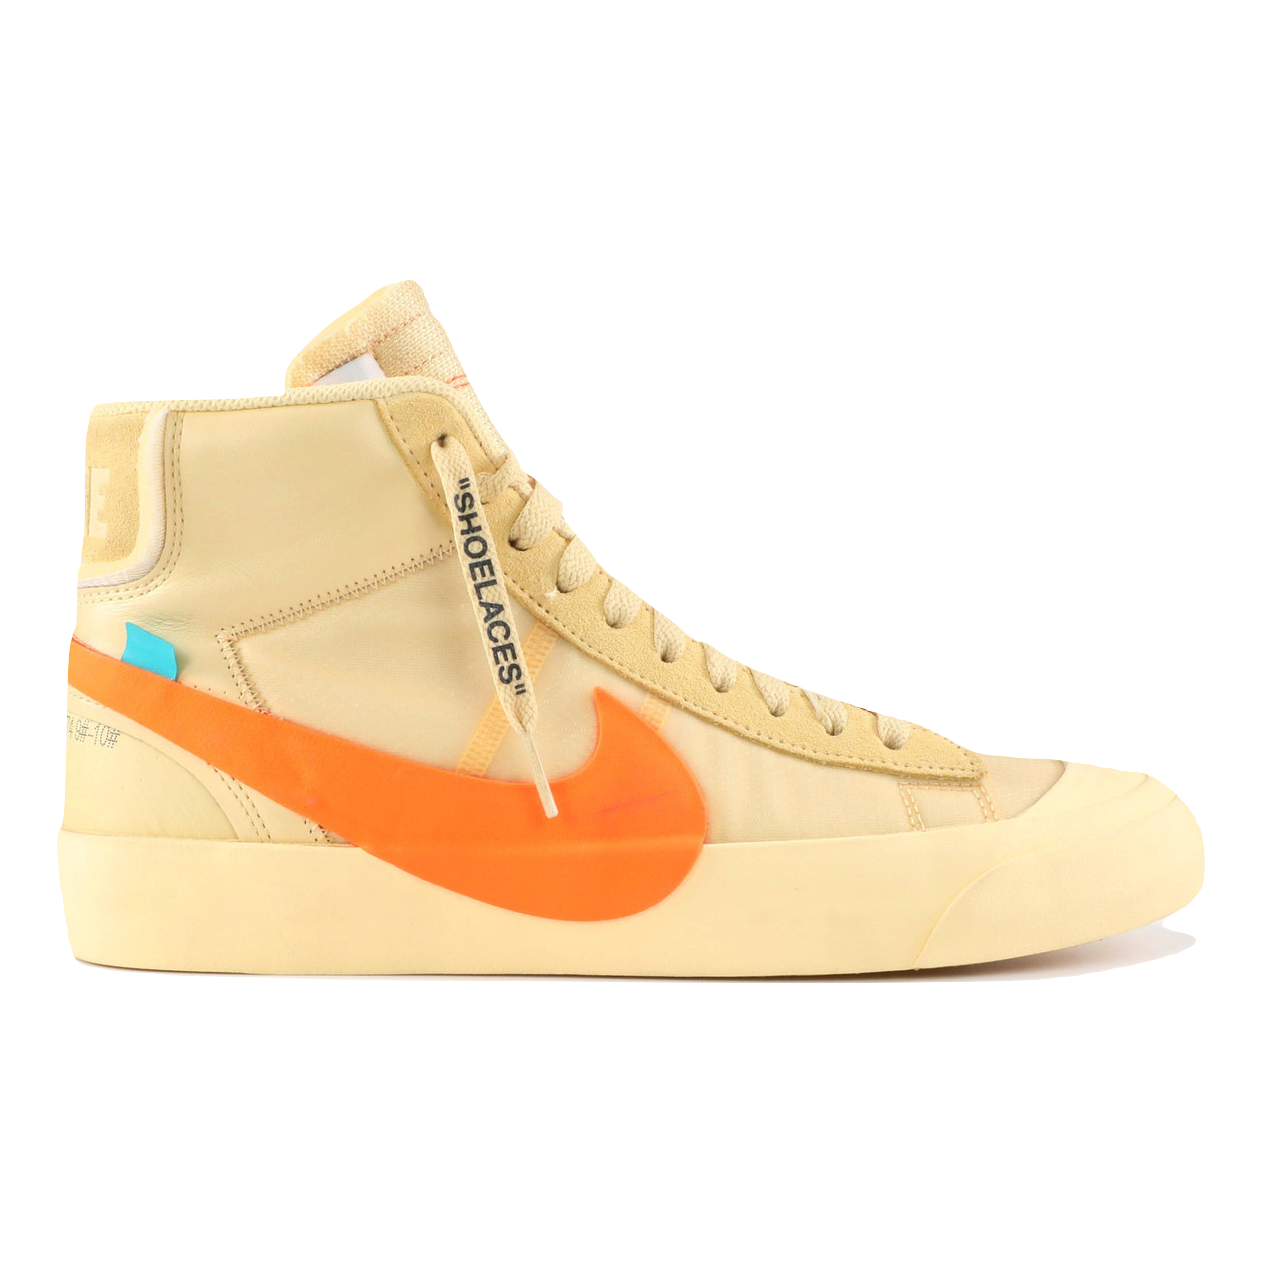 Luchtpost Dalset Gewoon overlopen The 10: Nike Blazer Mid - All Hallows Eve - Used – Grails SF